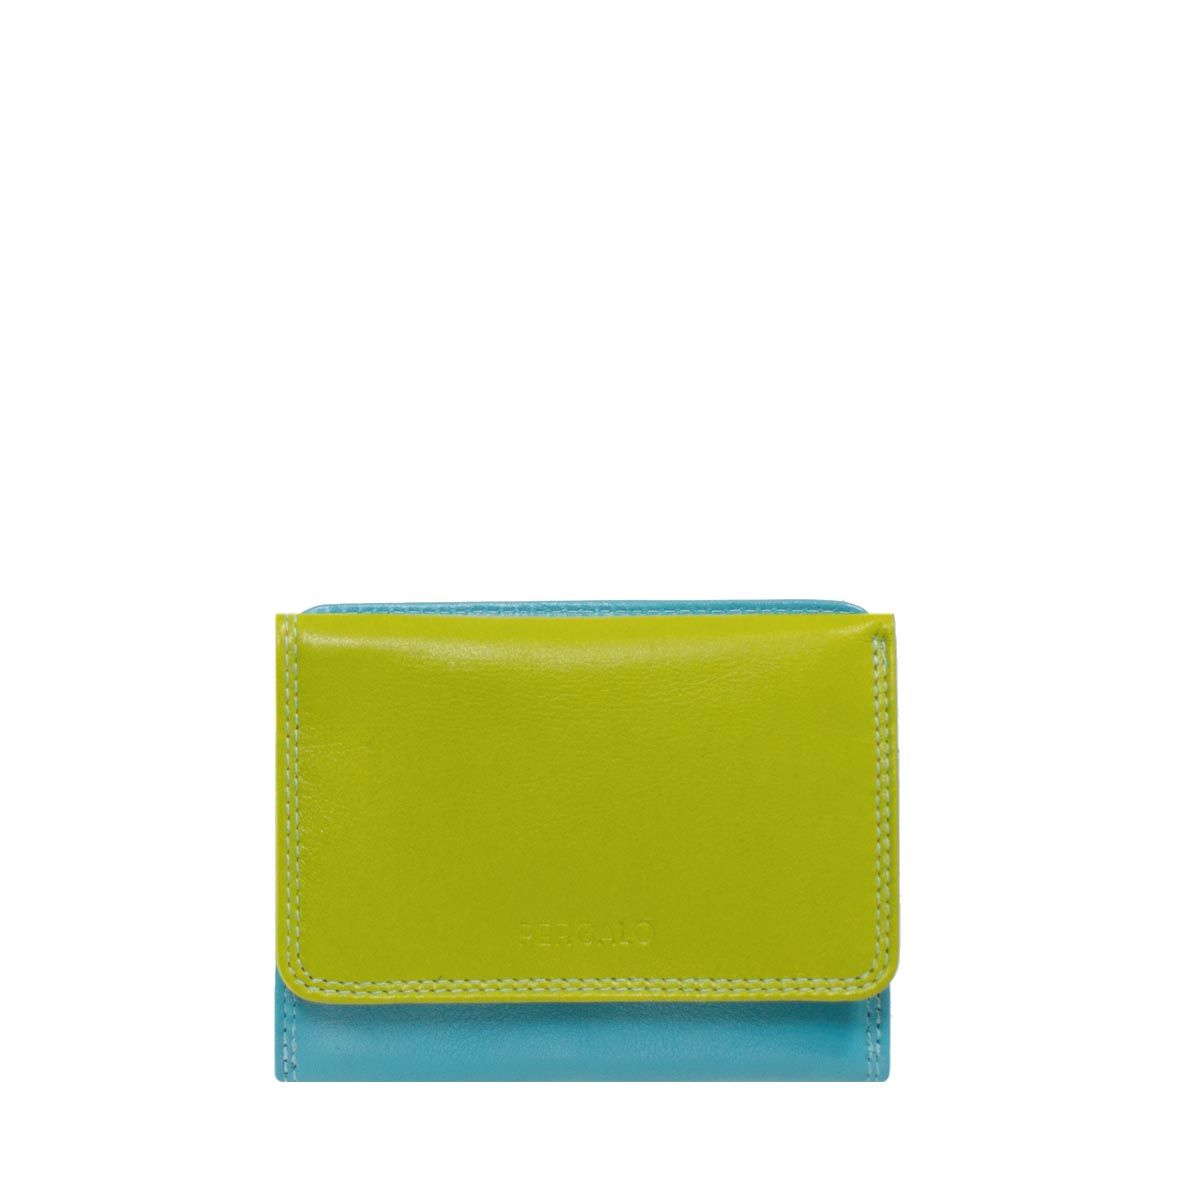 Pergalo Small Leather Purse | Lime & Coral | Shop Today. Get it ...